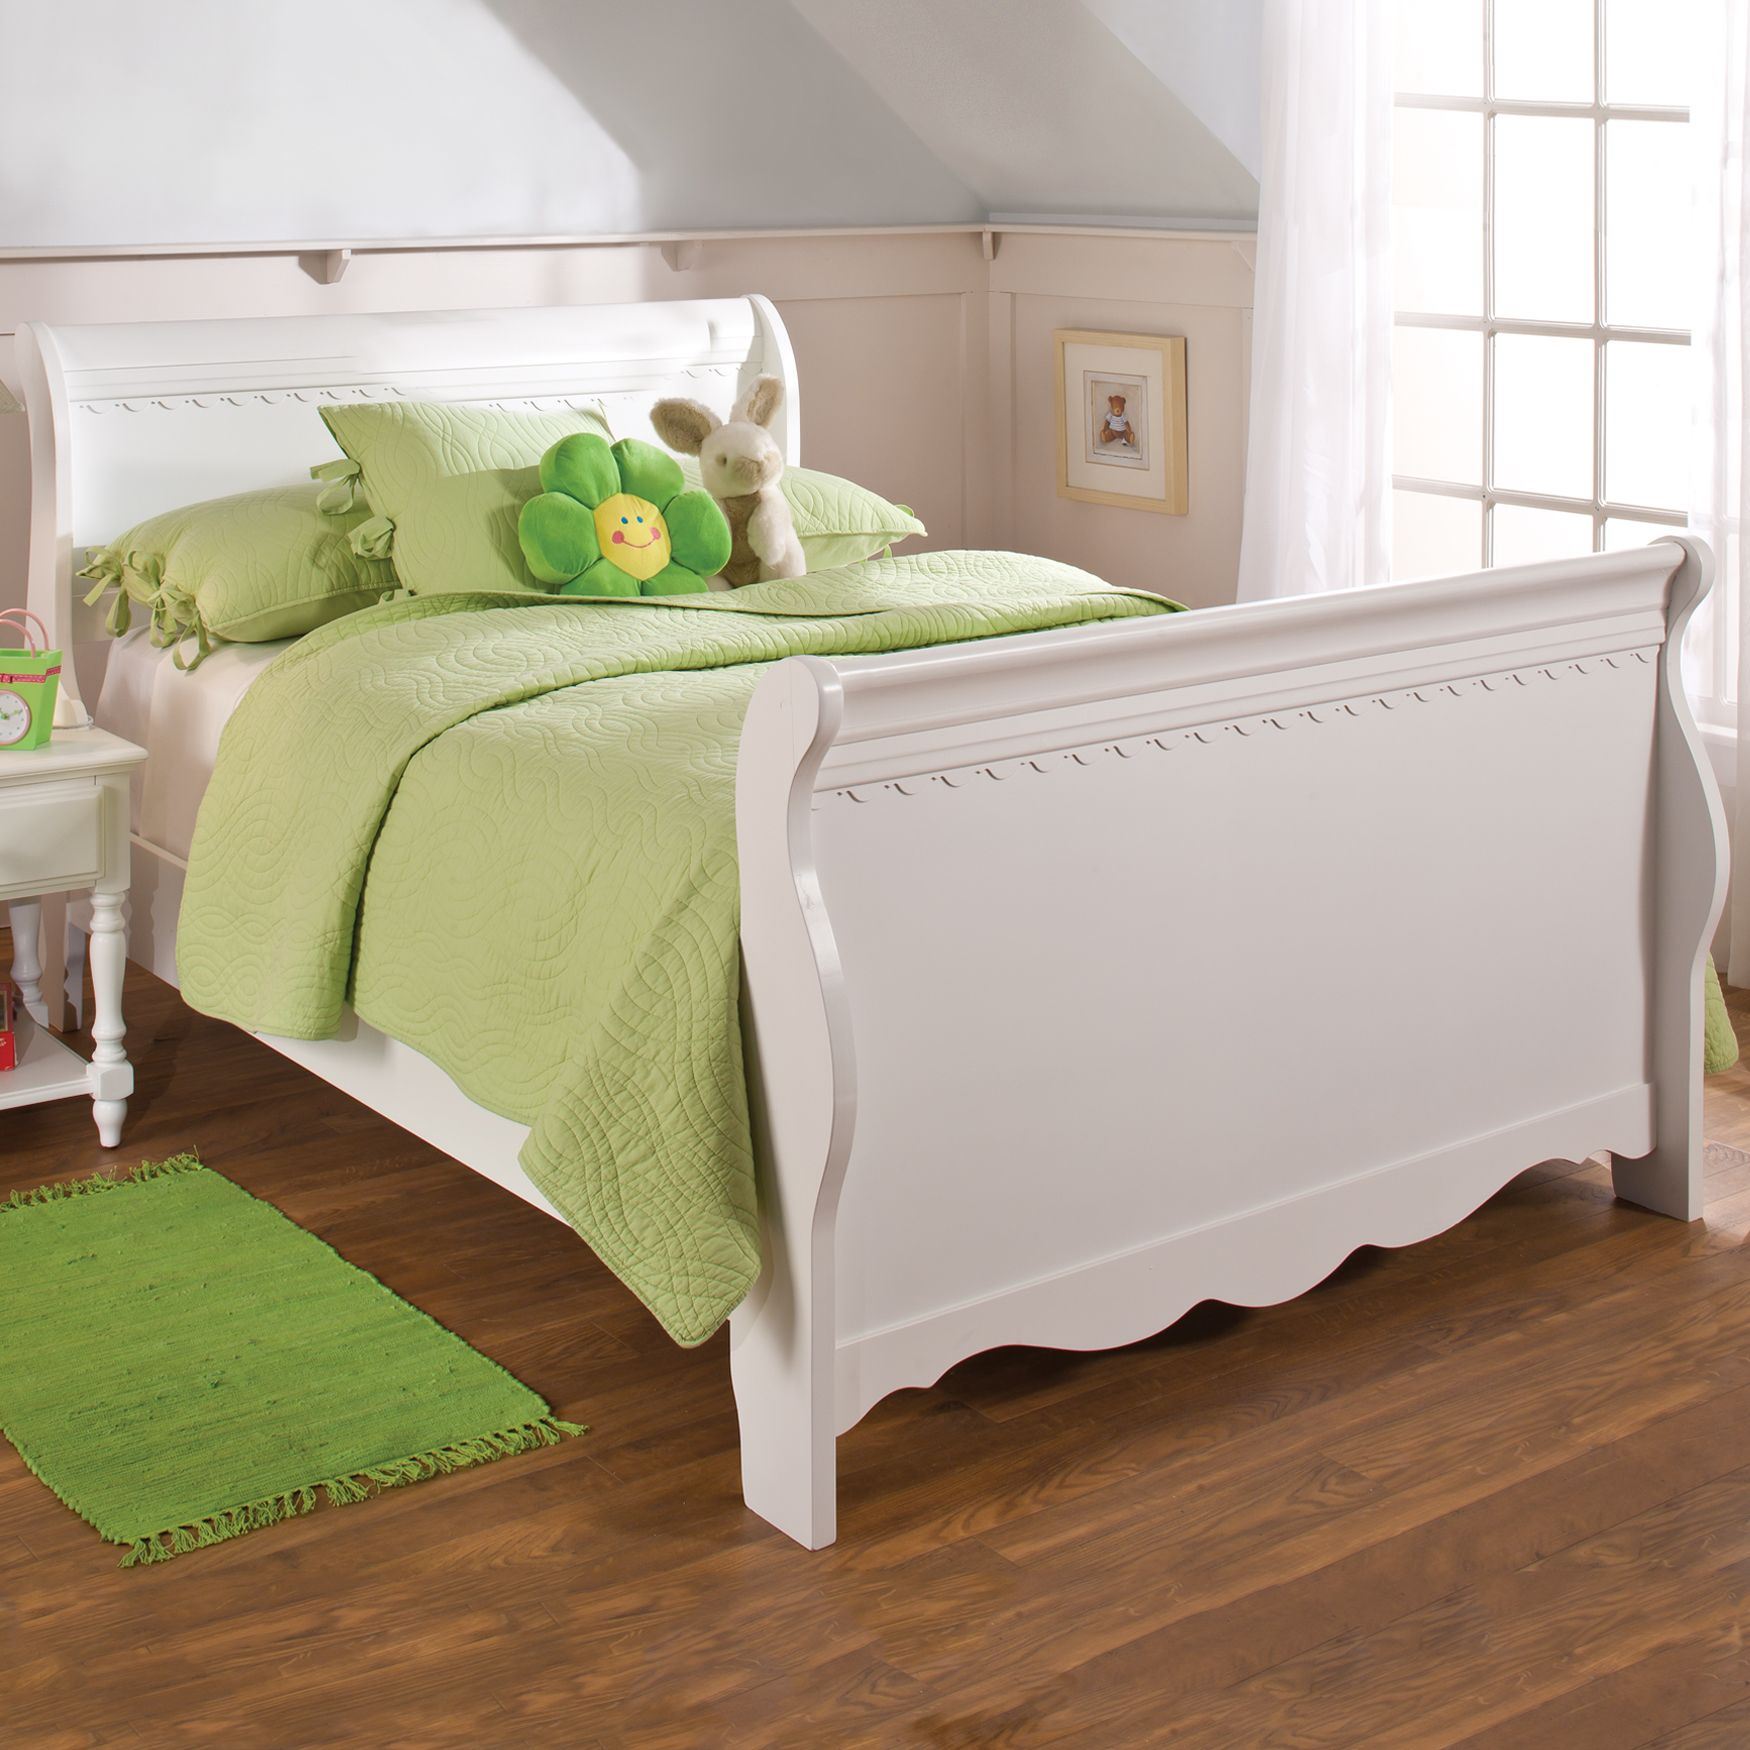 Hillsdale Lauren Sleigh Bed with Side Rails| Beds ...